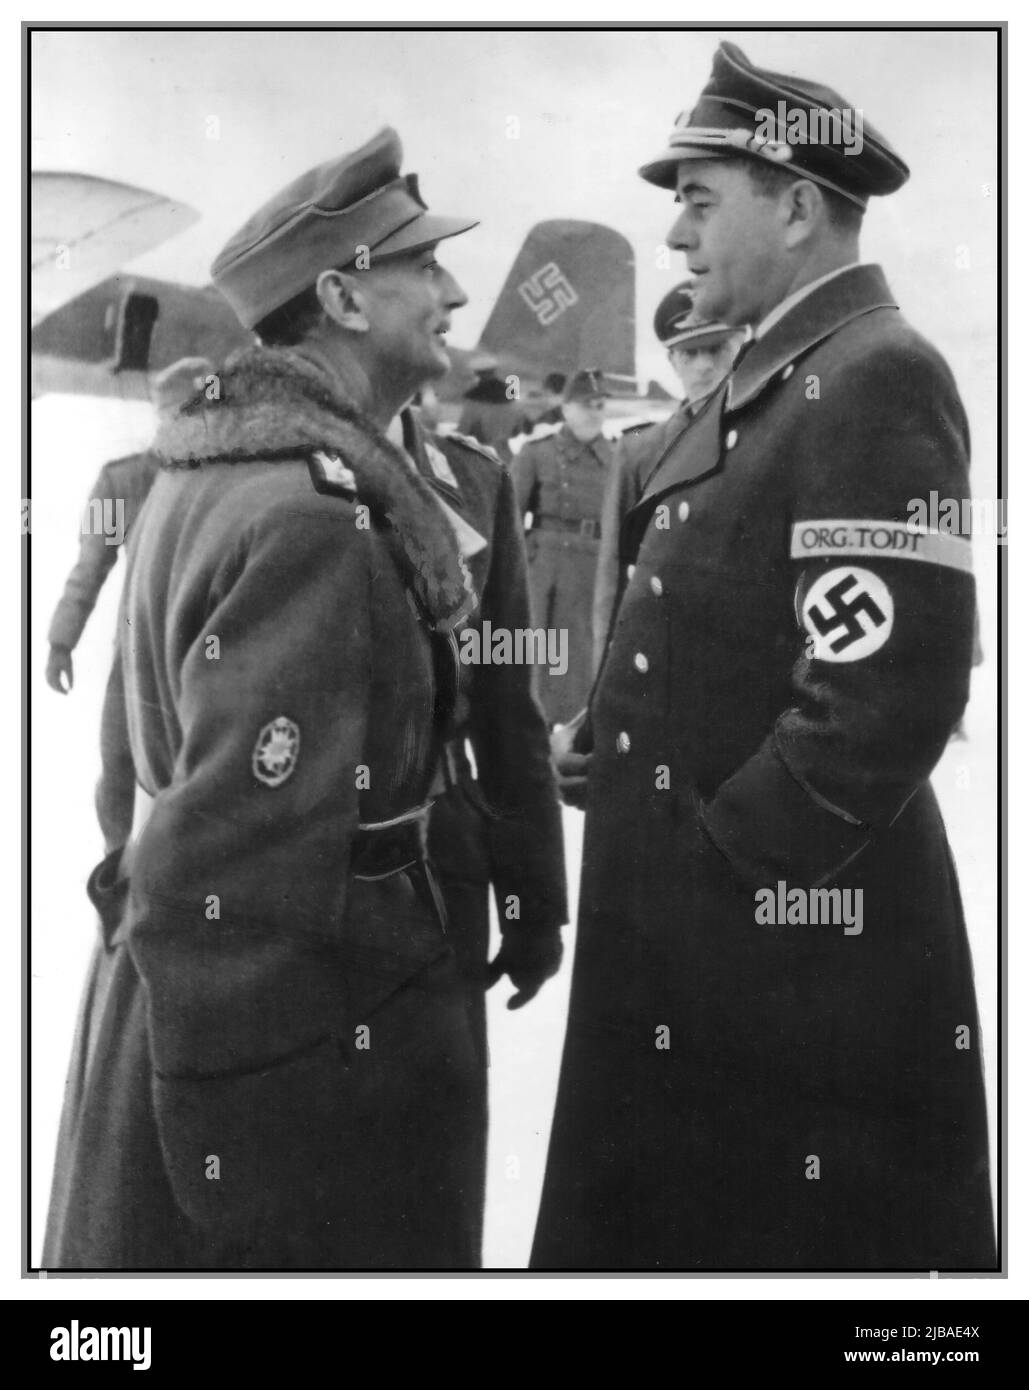 Vintage WW2 Nazi visit to Norway by Albert Speer (right) unusally in military uniform with Swastika armband and General Edward Dietl talking at the field airfield during a front visit to the north of Norway.  Junkers aircraft in background with Swastika symbol on the tail fin of Junkers Aircraft  Albert Speer, Edward Dietl World War II During the German occupation of Norway from 1940 to 1945, Hitler wanted to build an “Aryan” society with gleaming highways and ideal cities. The Nazis wanted to reshape occupied Norway with a remarkable building campaign headed by Speer Date February 1944 Stock Photo